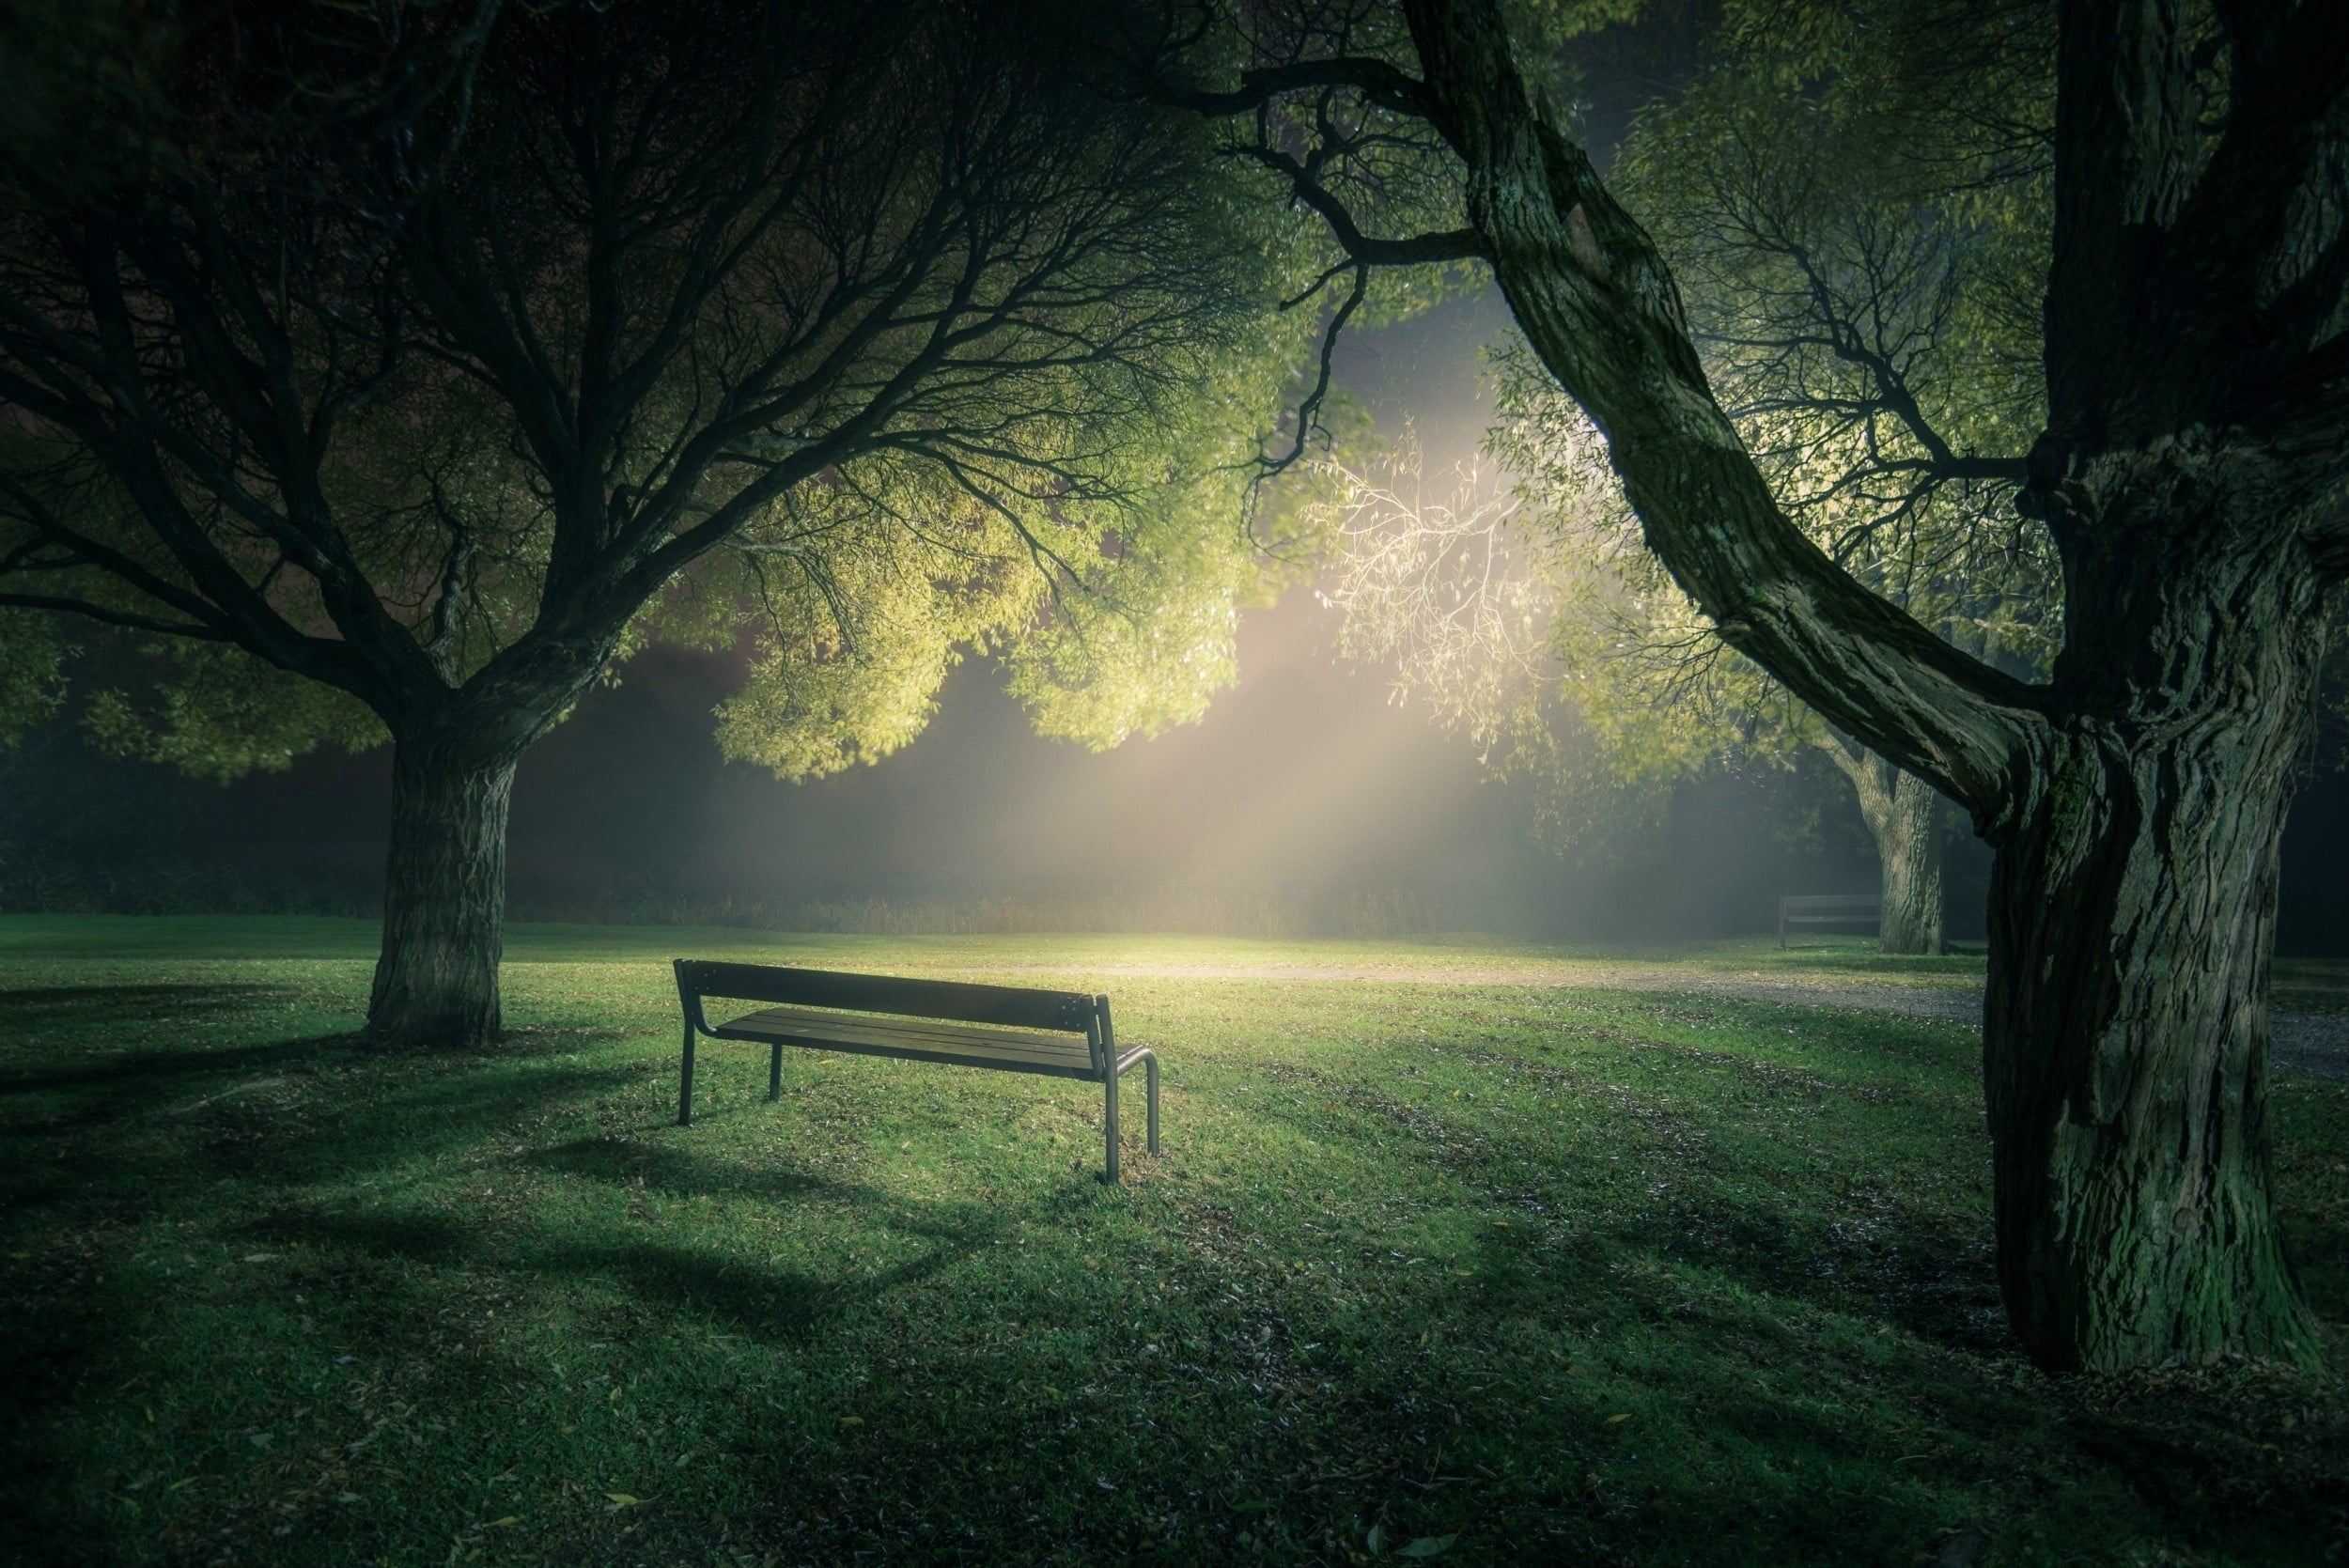 brown wooden bench, park, lawns, trees, nature, lights, green